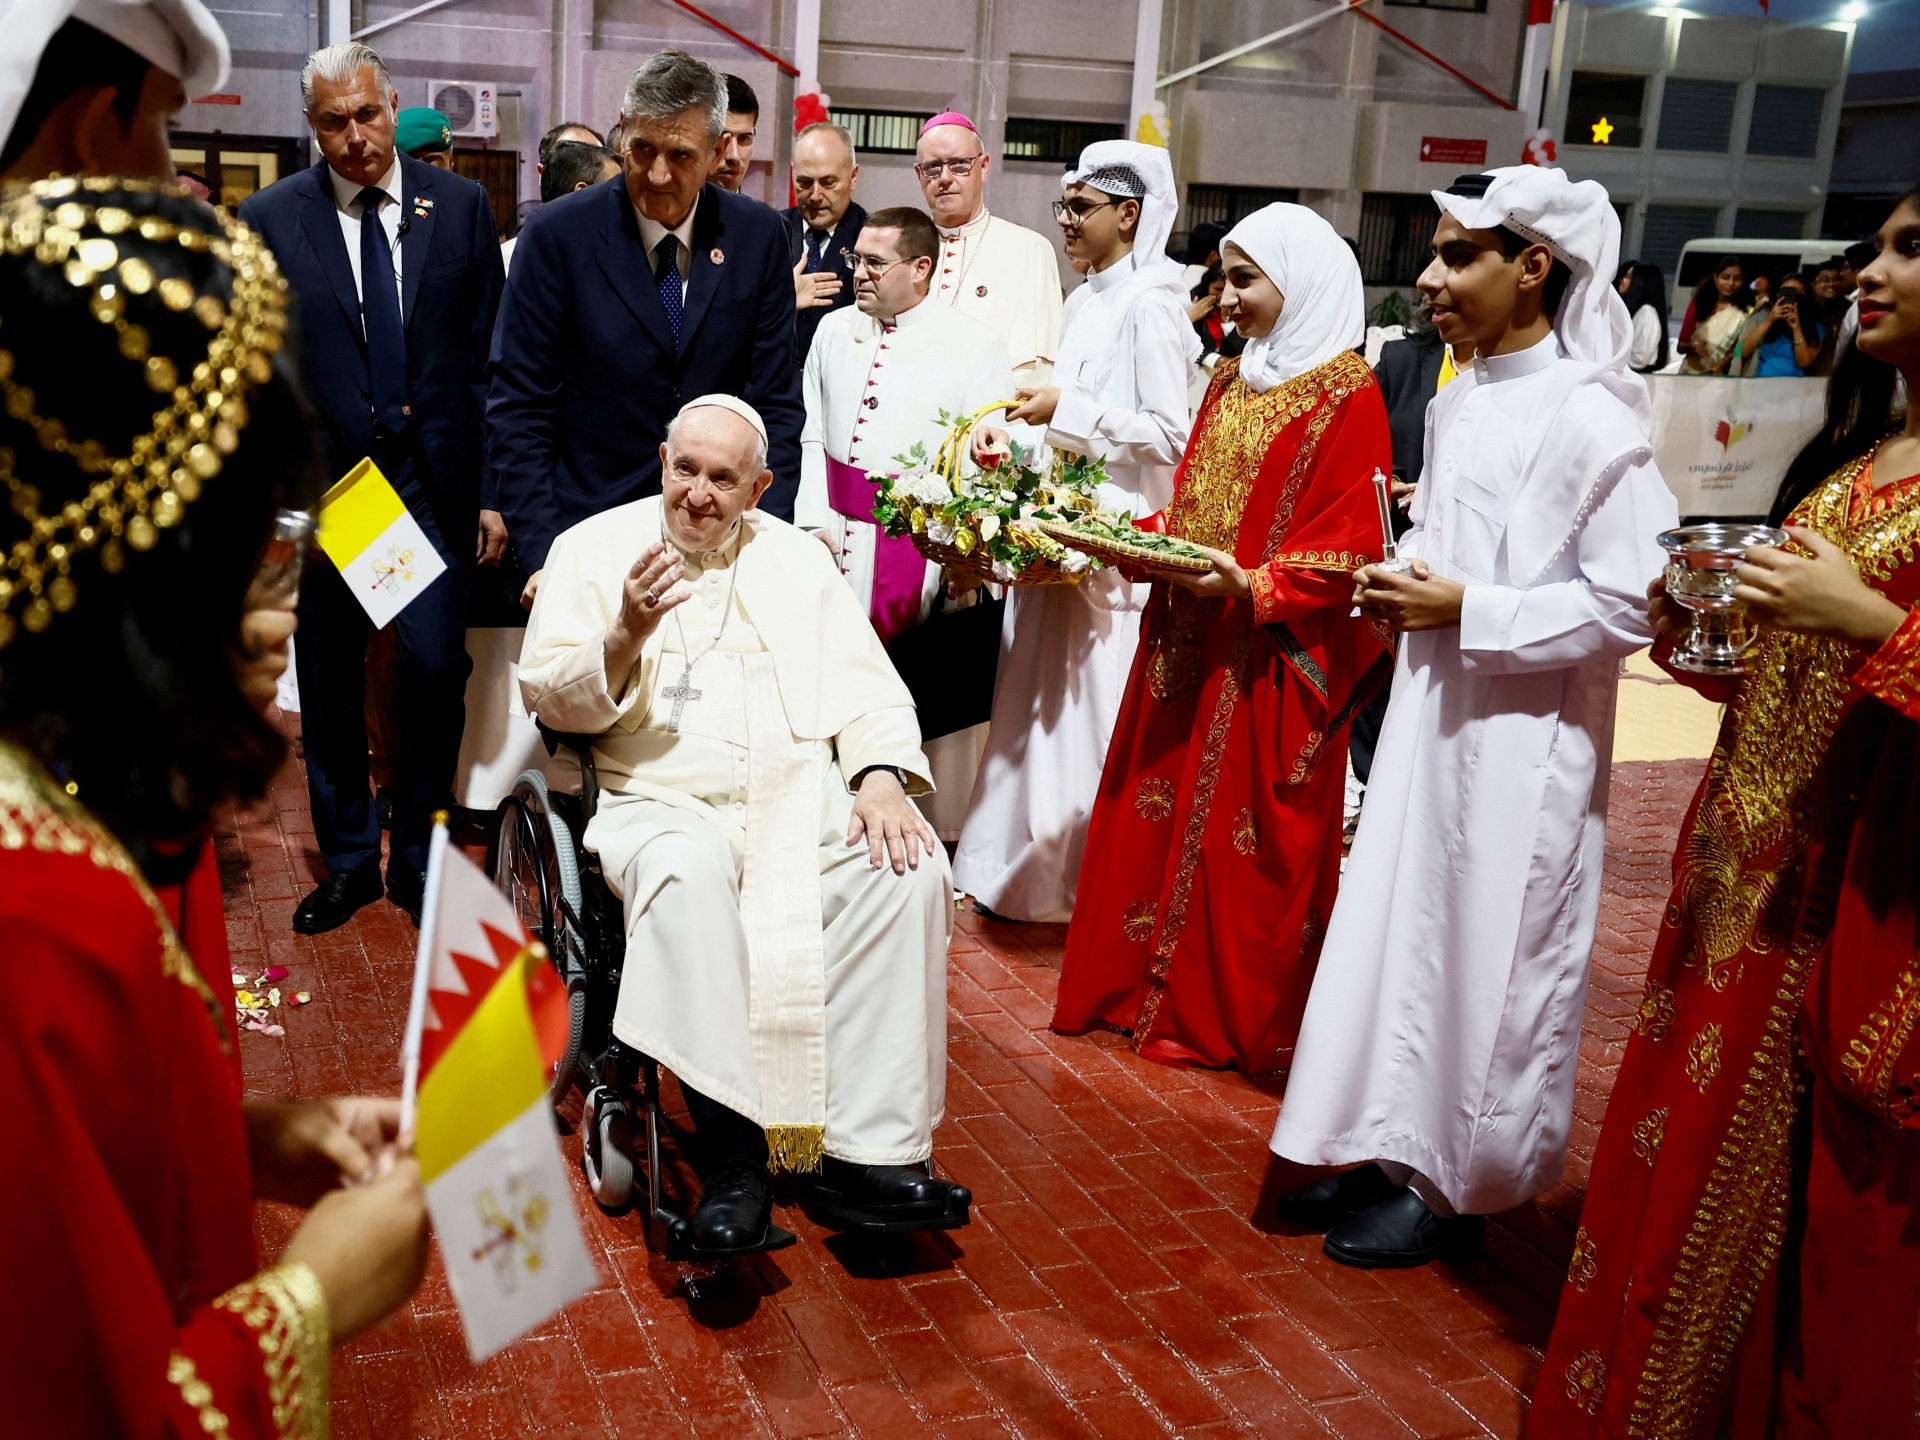 Bahraini prisoners’ families hold small protest during pope visit